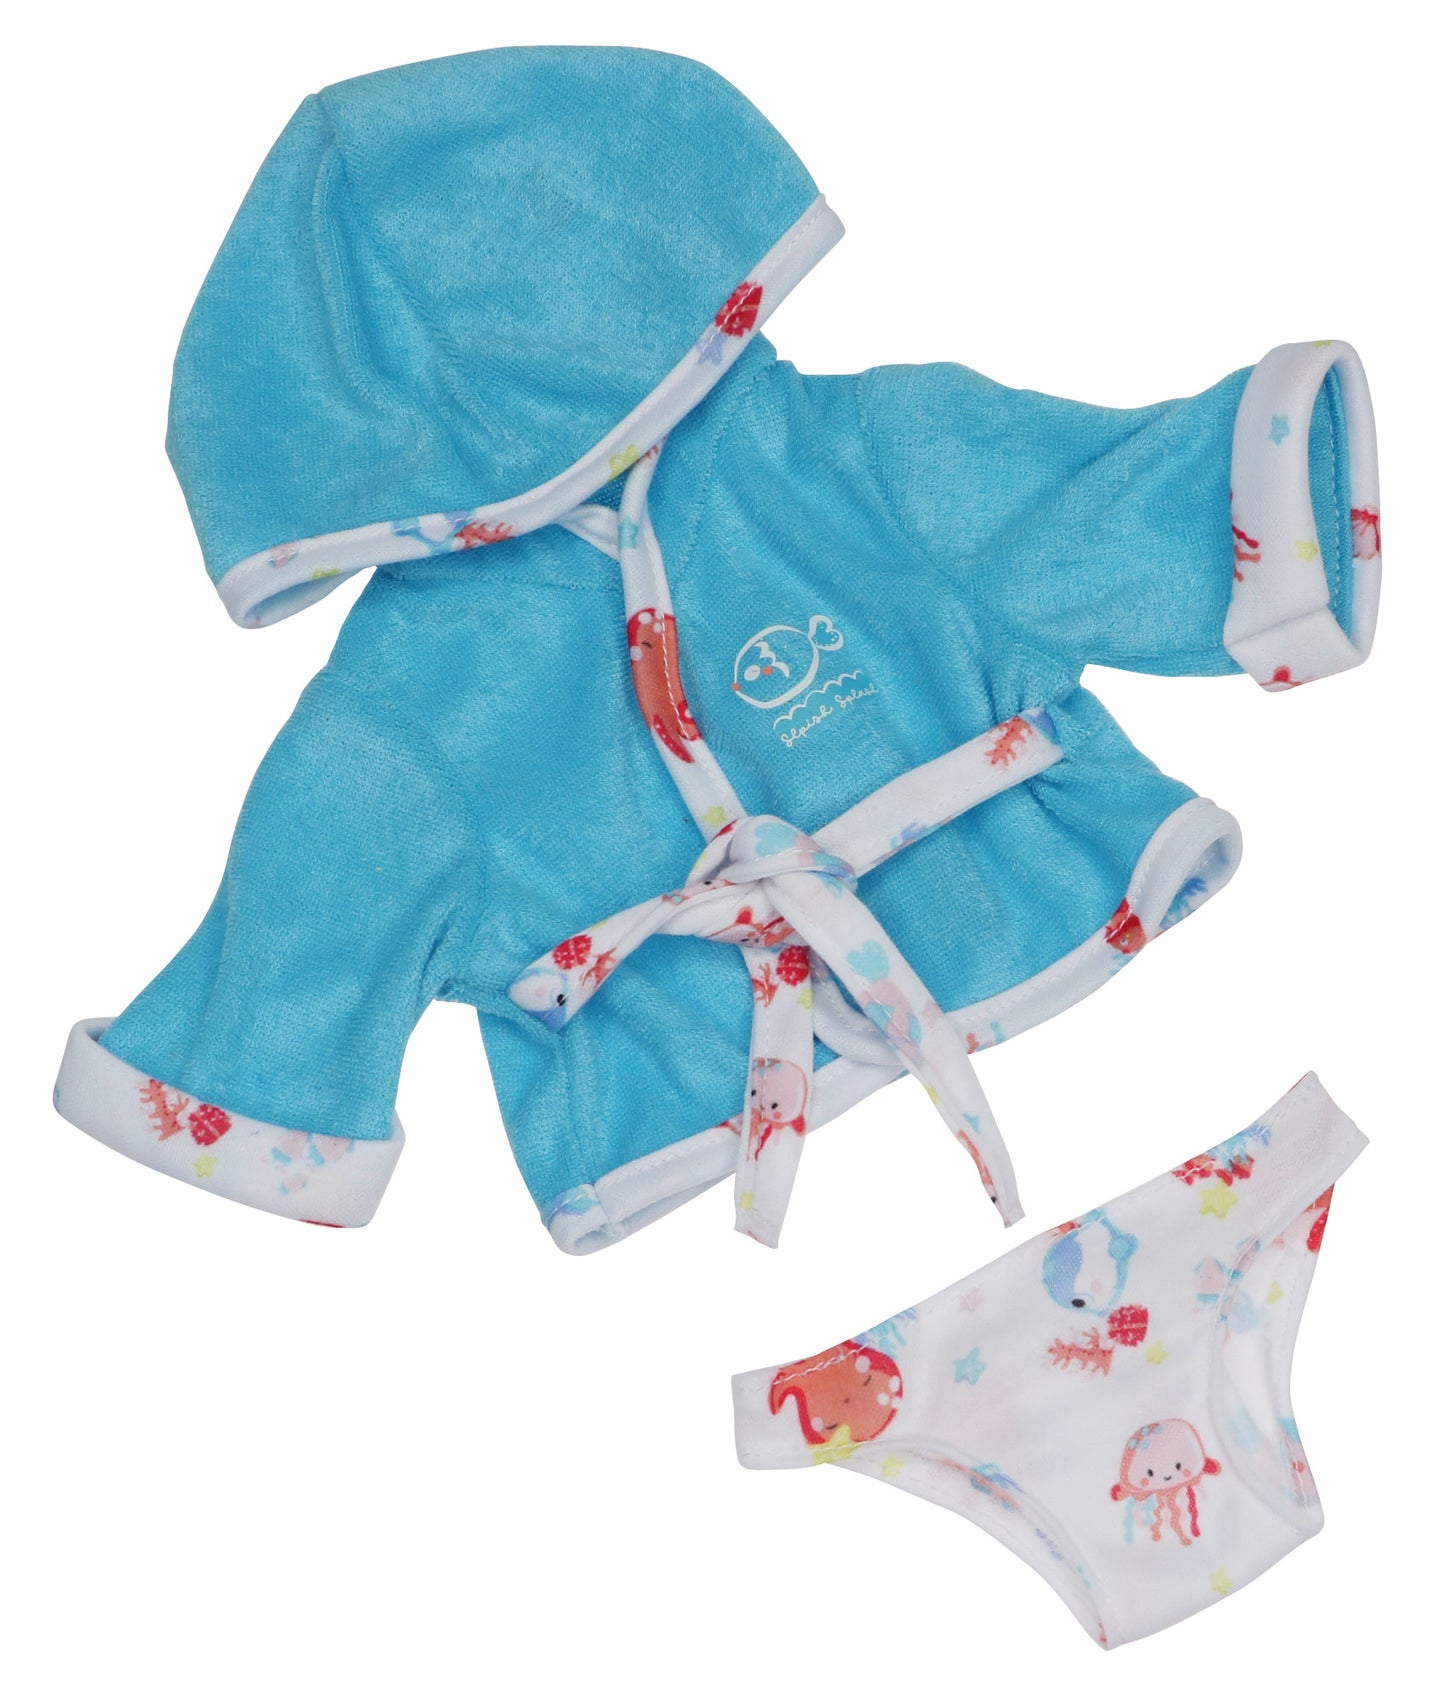 Lots to Love Babies® All-Vinyl Baby Doll w/ Hooded Towel and Bath Accessories. Hispanic